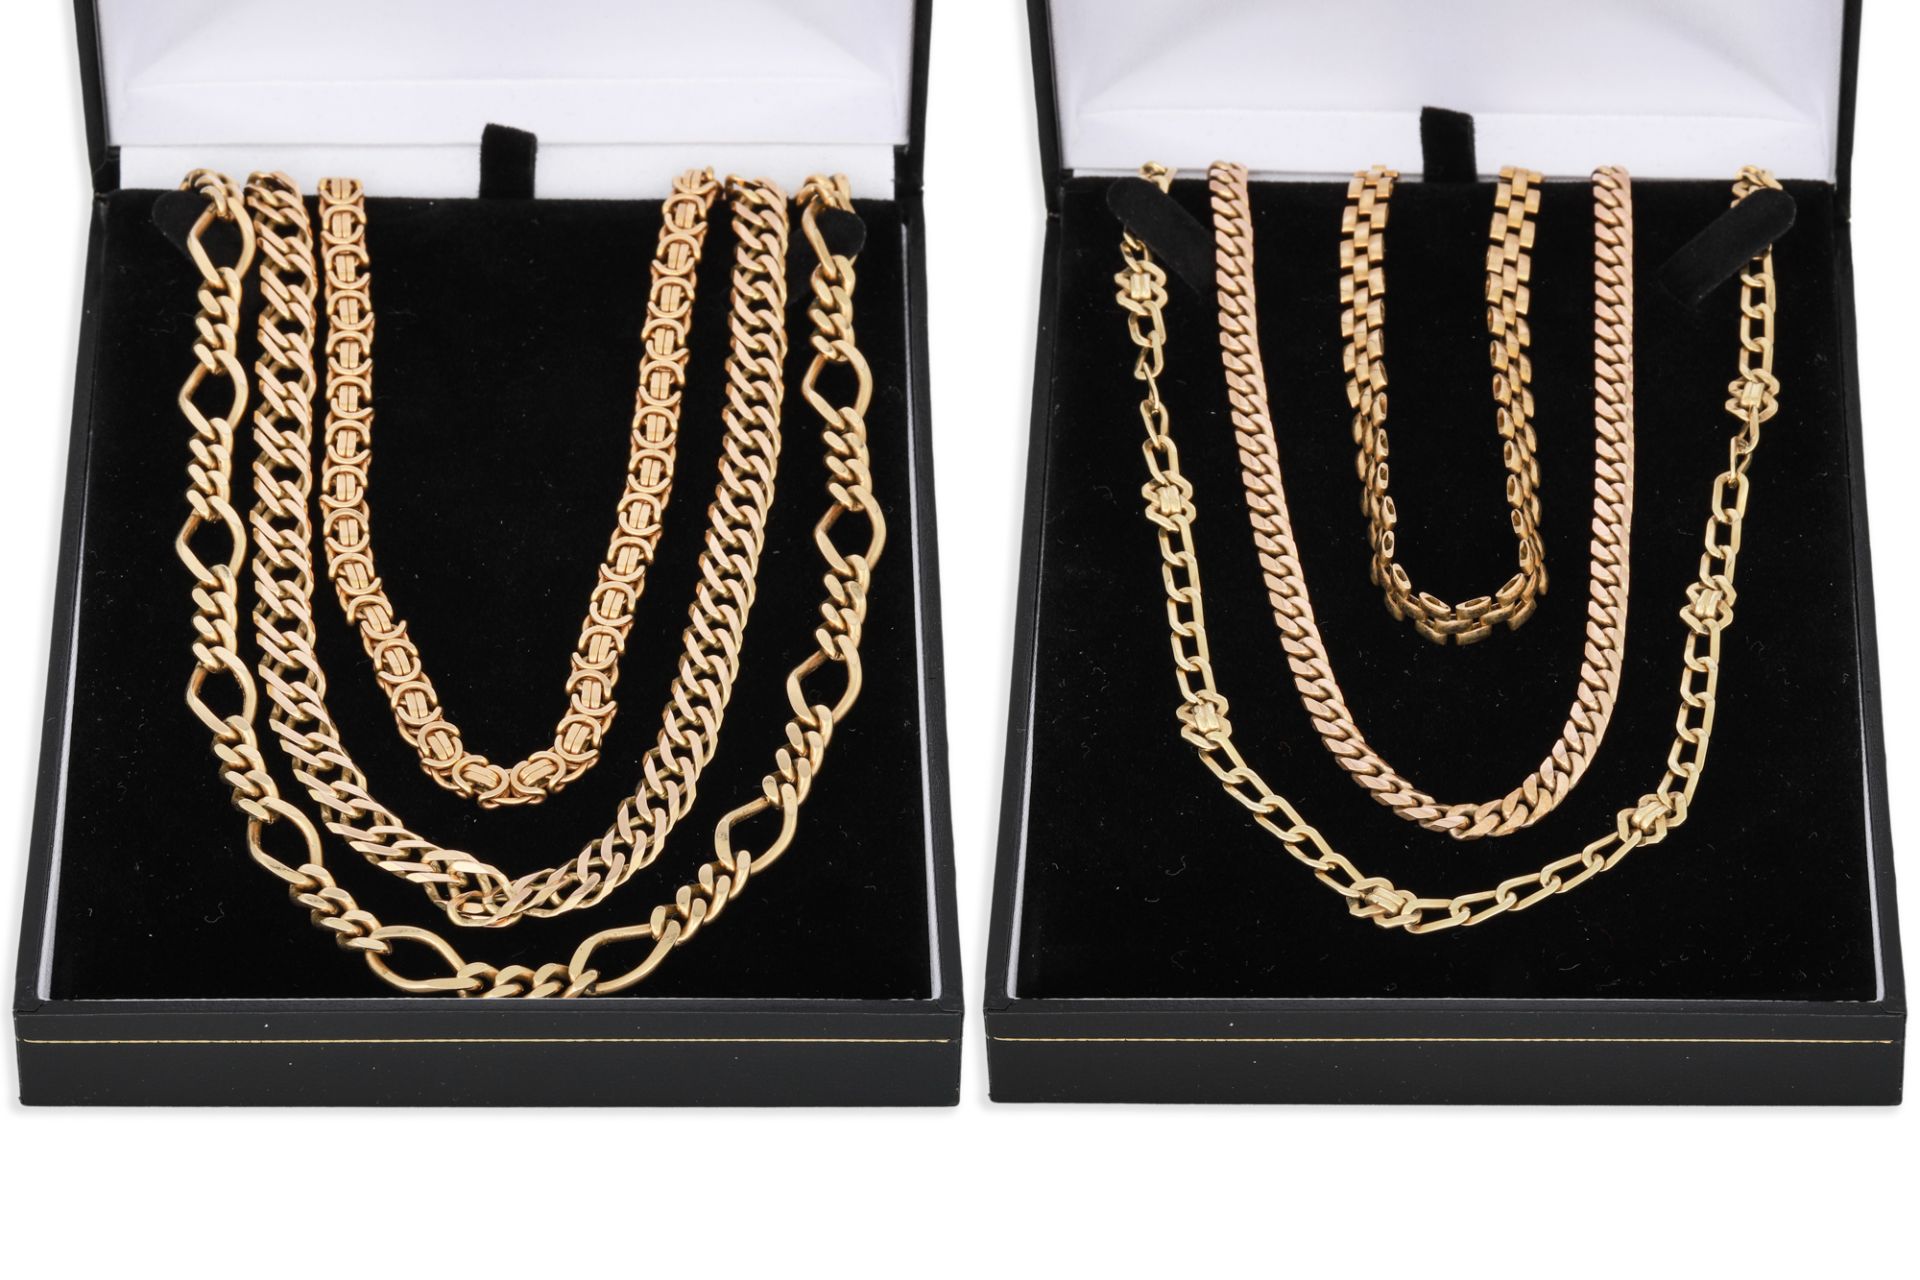 SIX 9CT GOLD FANCY LINK NECK CHAINS, 188 g.